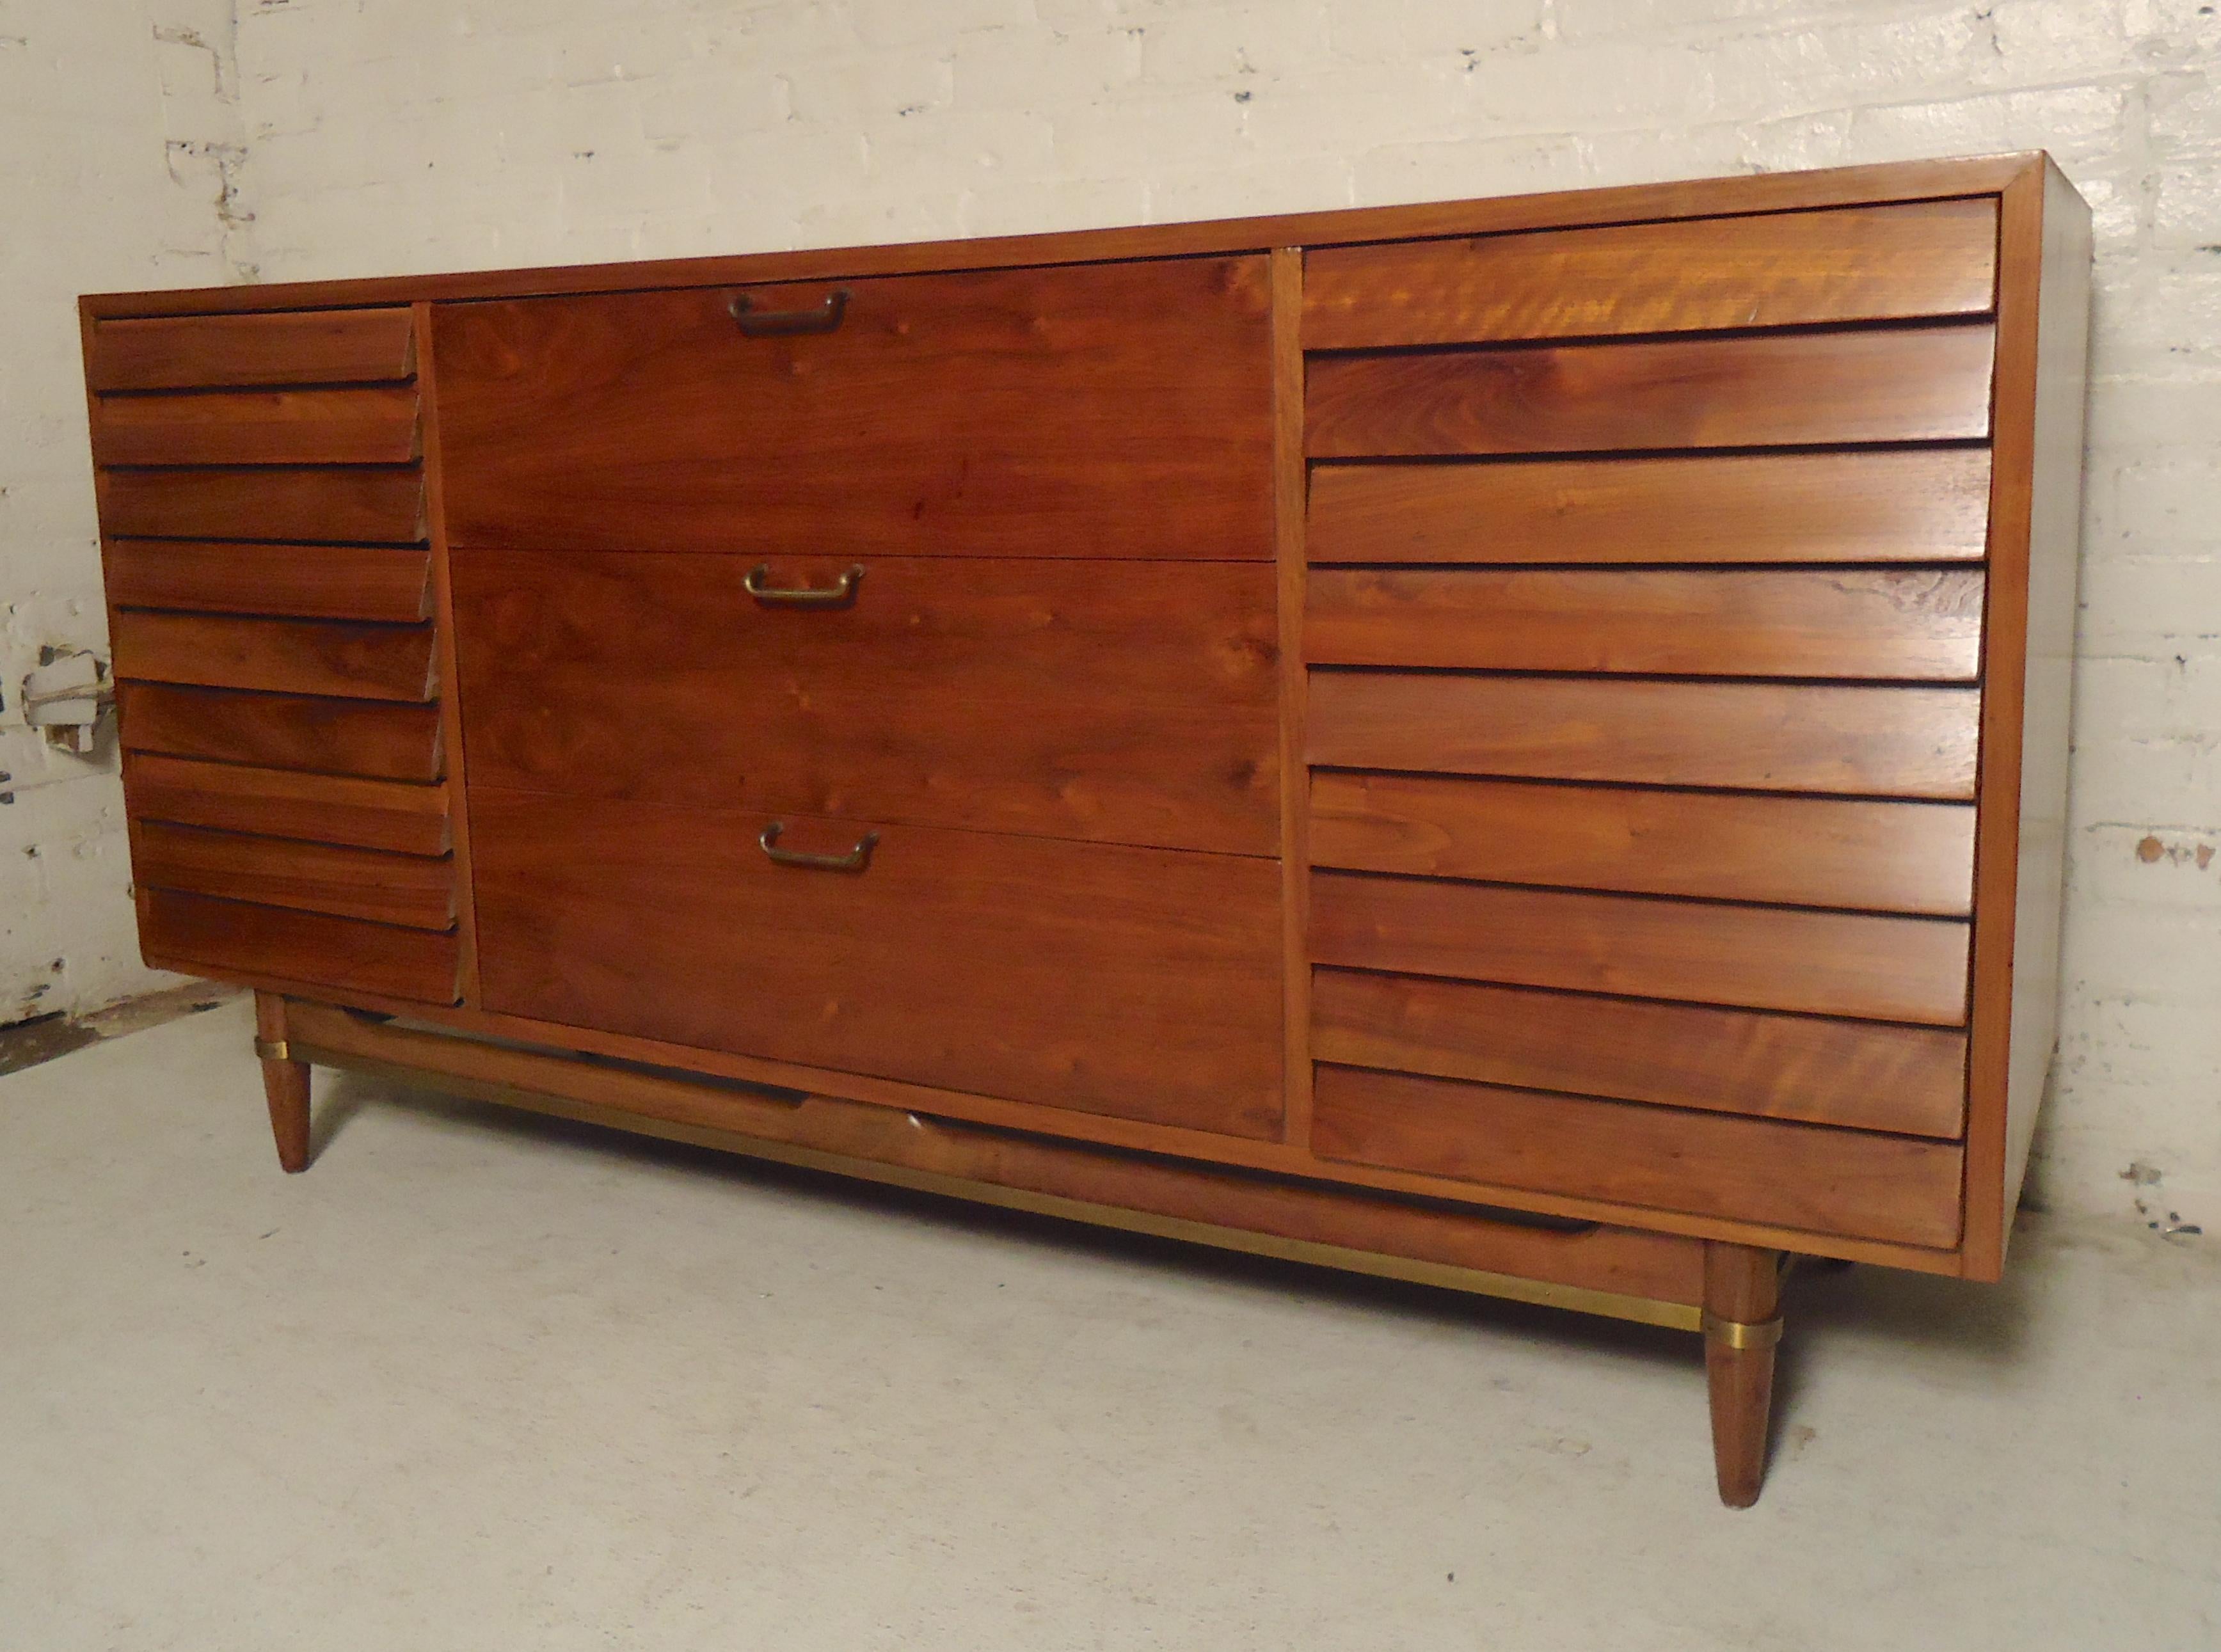 Vintage modern walnut dresser by American of Martinsville. Great style with louvered drawers and brass accents. Nine total drawers.
(Please confirm item location - NY or NJ - with dealer).
 